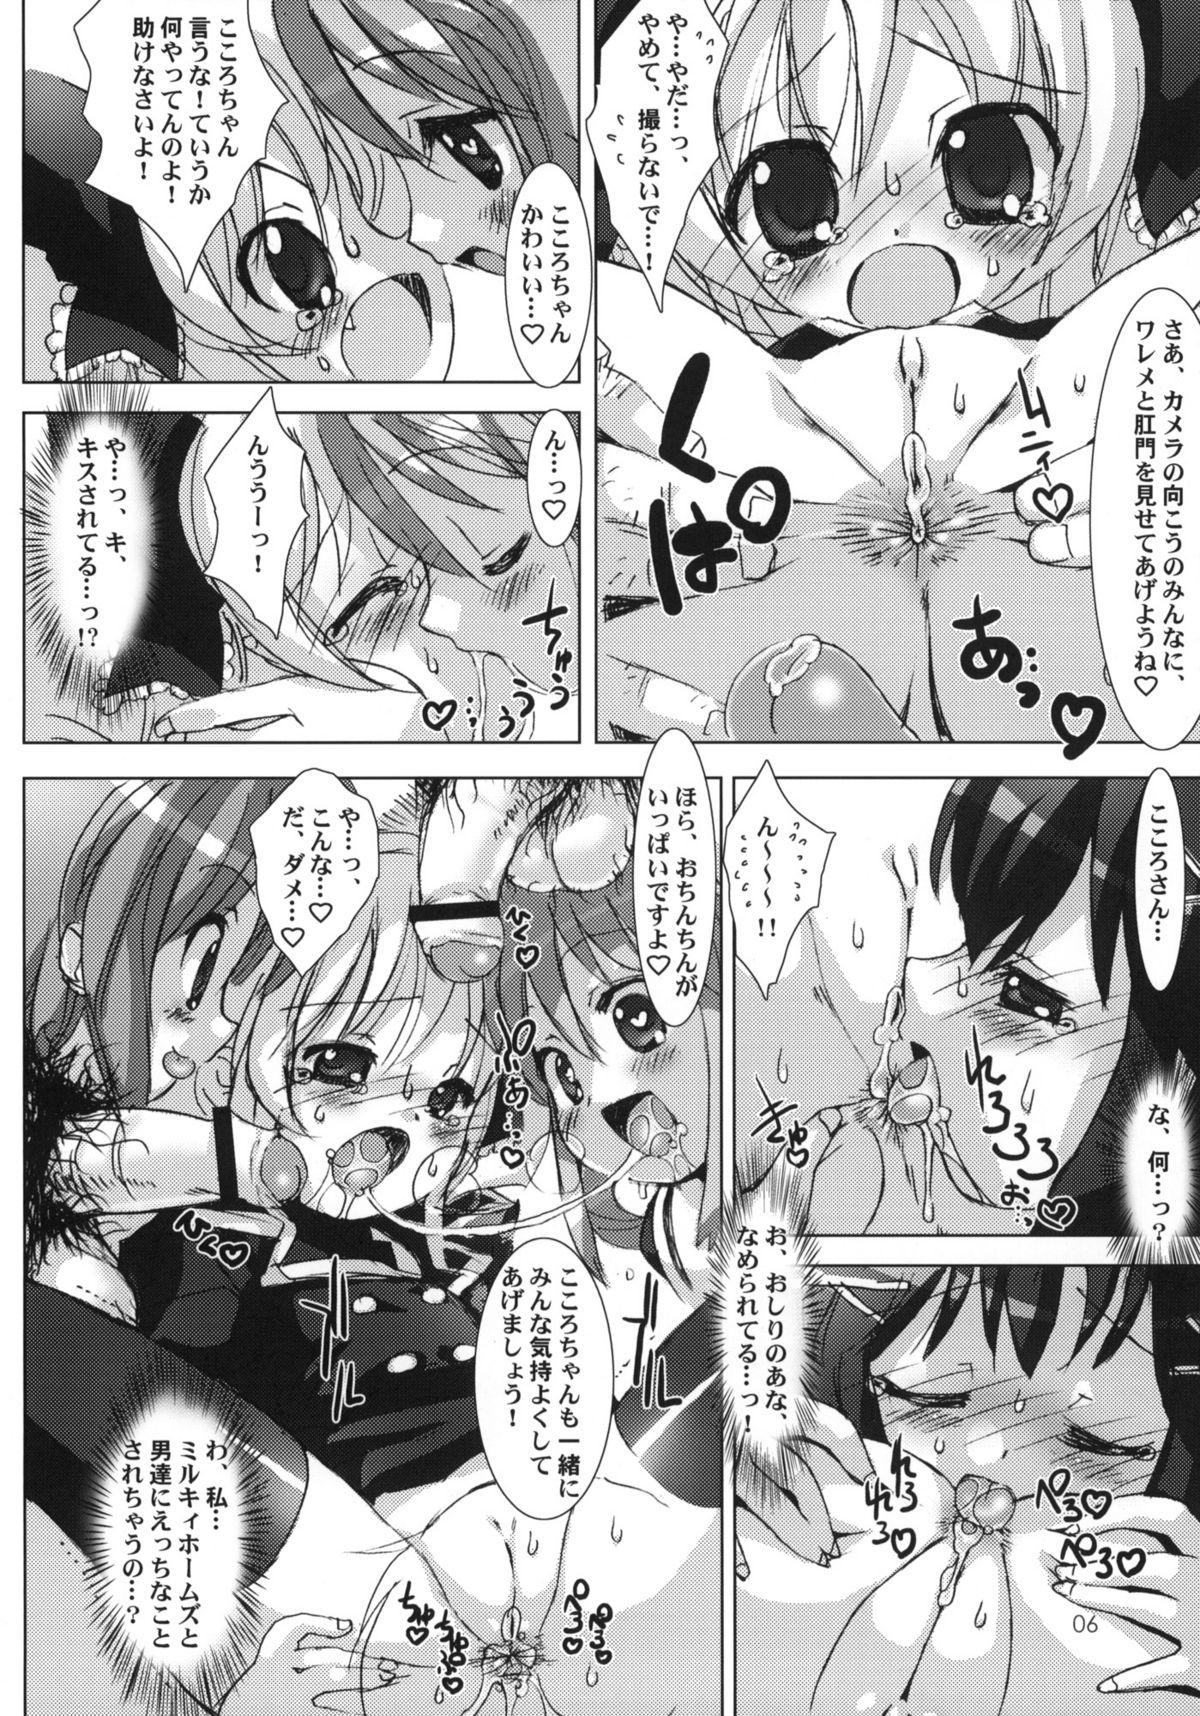 Licking Milky Angels - Tantei opera milky holmes Couple Sex - Page 7